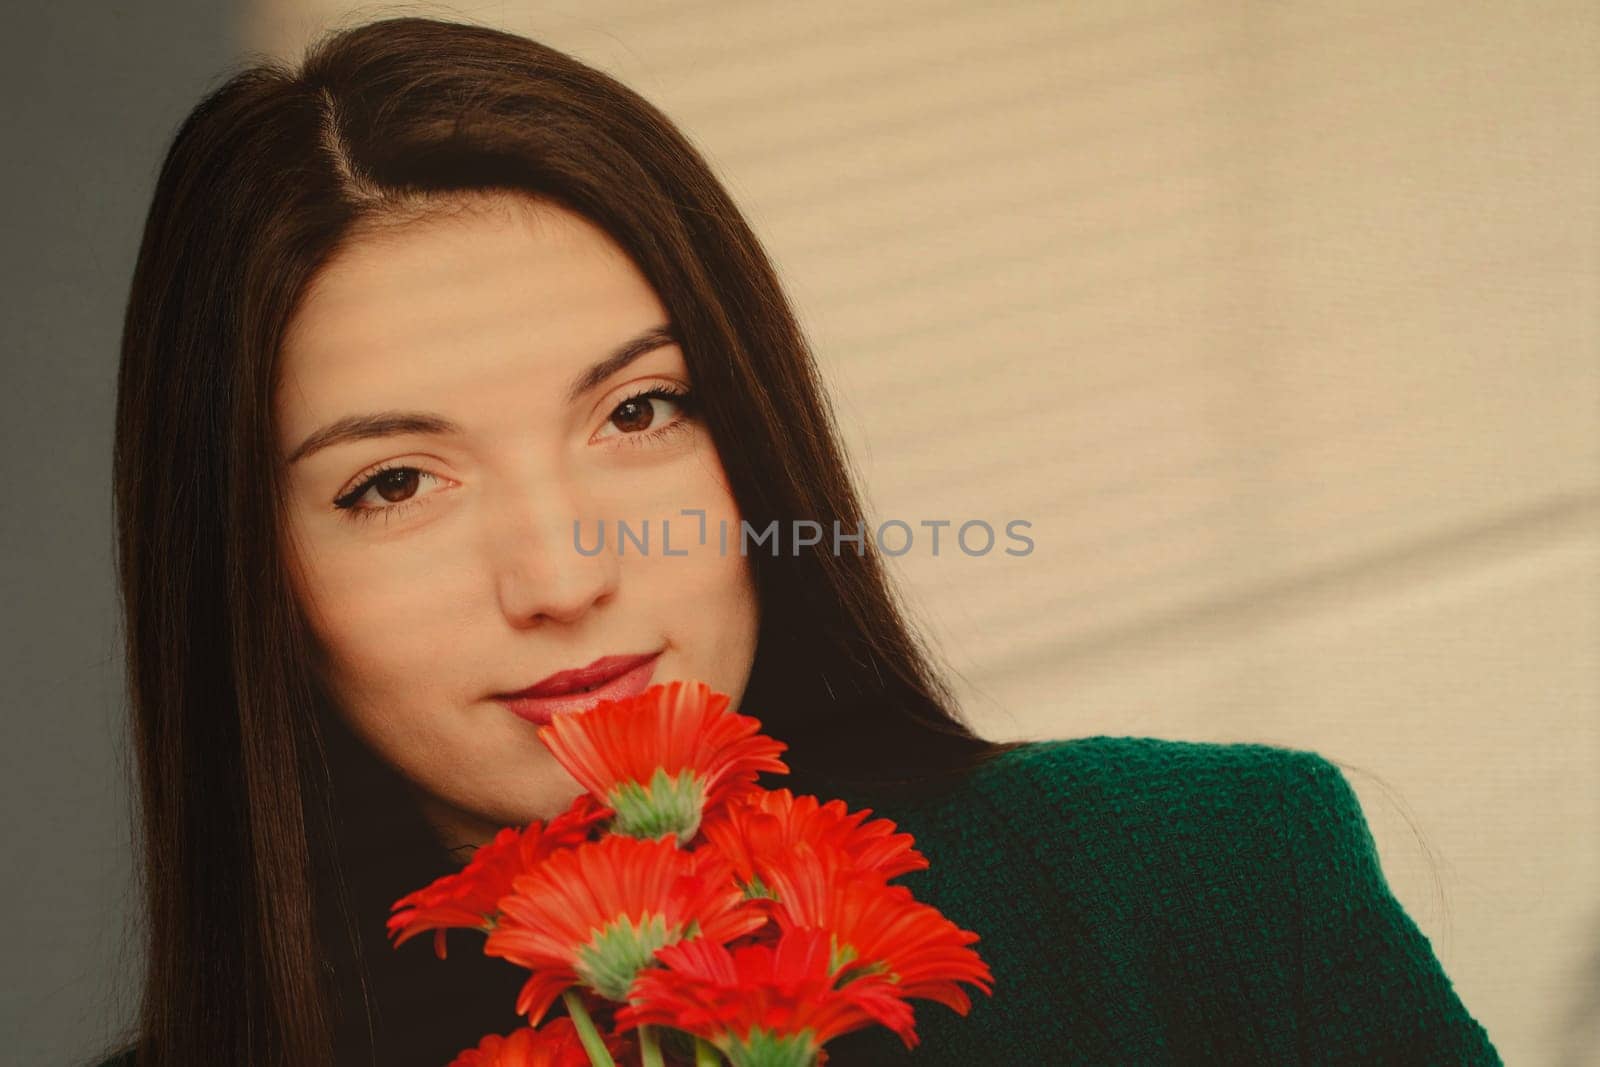 Portrait of one beautiful young Caucasian brunette girl with brown eyes, long hair in a green fashionable jacket holding a bouquet of red gerbernas near her face against a white wall, close-up side view.